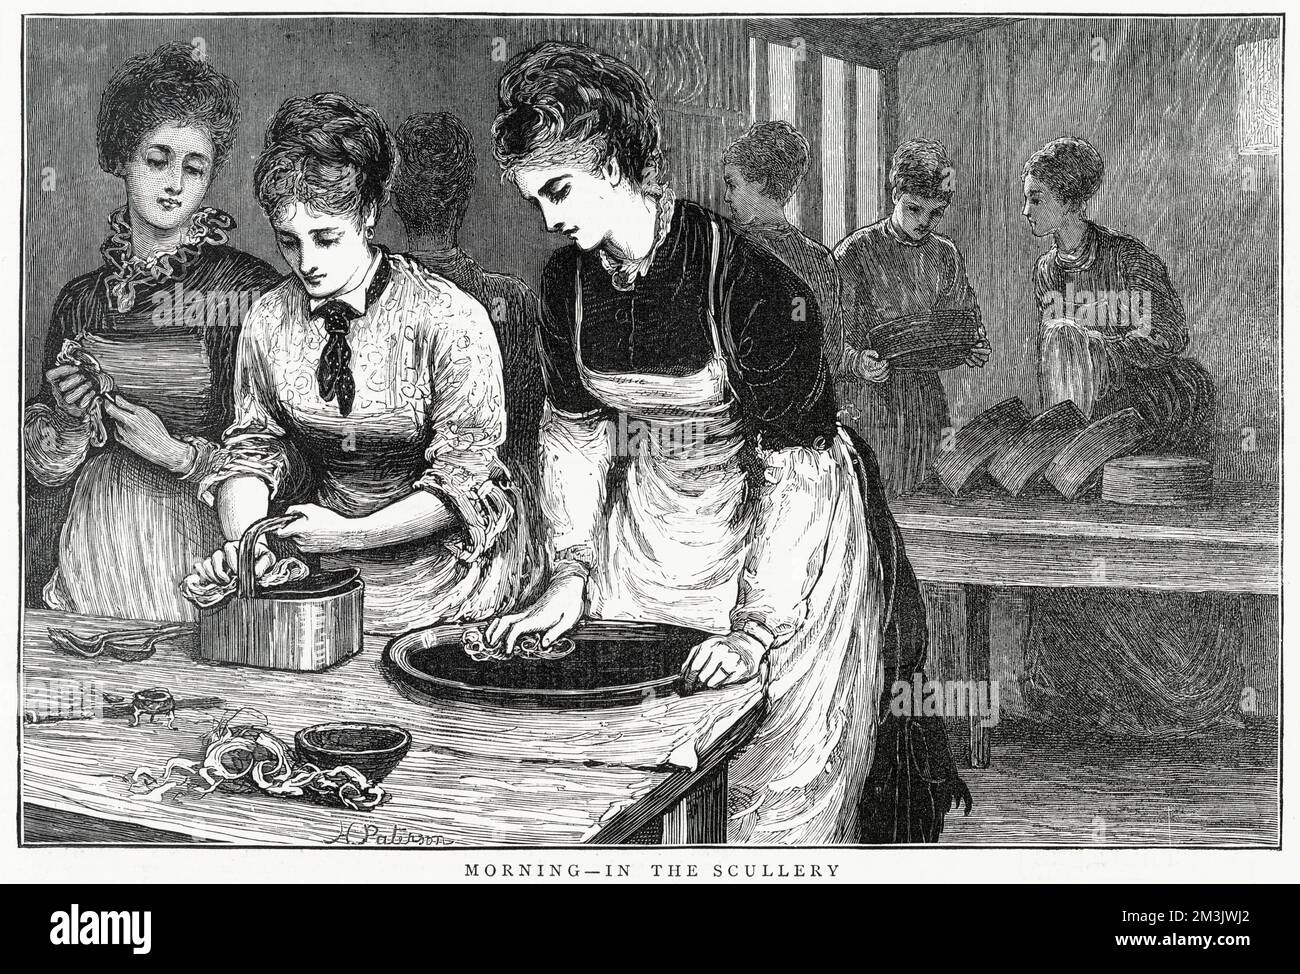 The National Training School of Cookery at South Kensington, London. Established in 1873, and commenced its work at South Kensington in 1874 'with a view to promote generally the diffusion of a knowledge of cookery amongst all classes of Her Majesty's subjects'. This shows a group of women spending the morning cleaning serving dishes and cookware in the scullery. Stock Photo